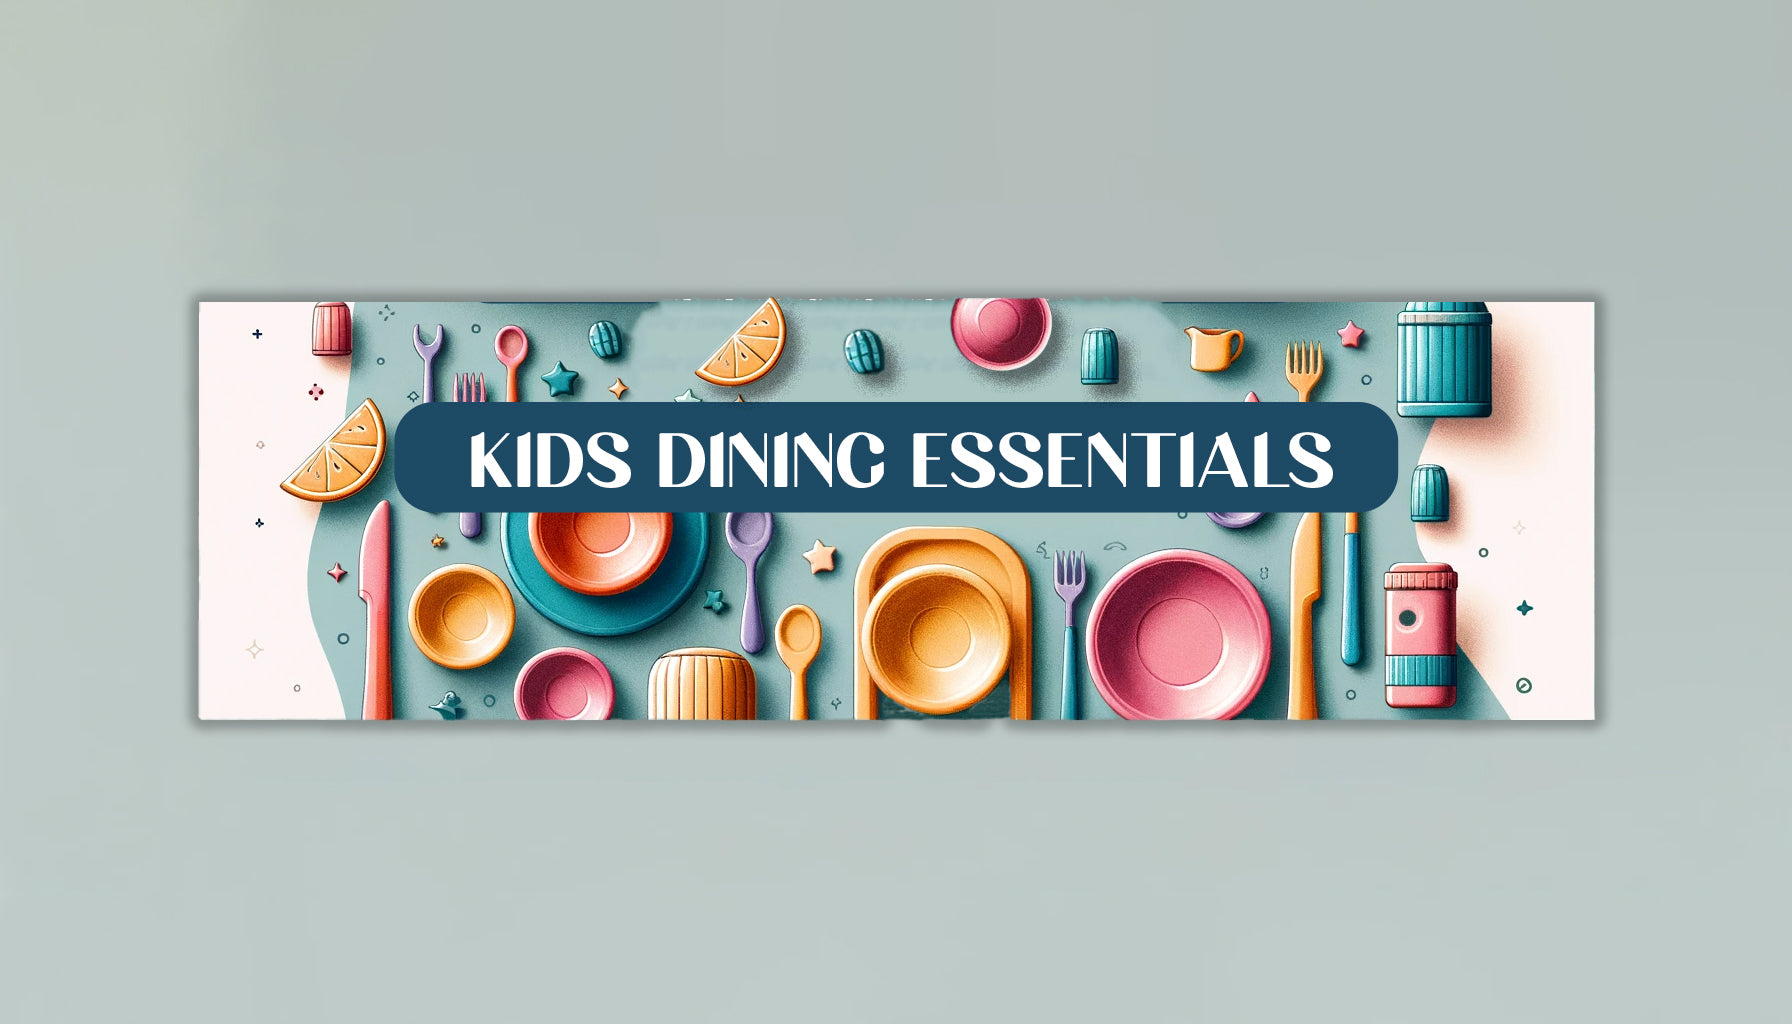 The Kids Dining Essentials Collection is thoughtfully designed to make mealtime fun and functional for children.